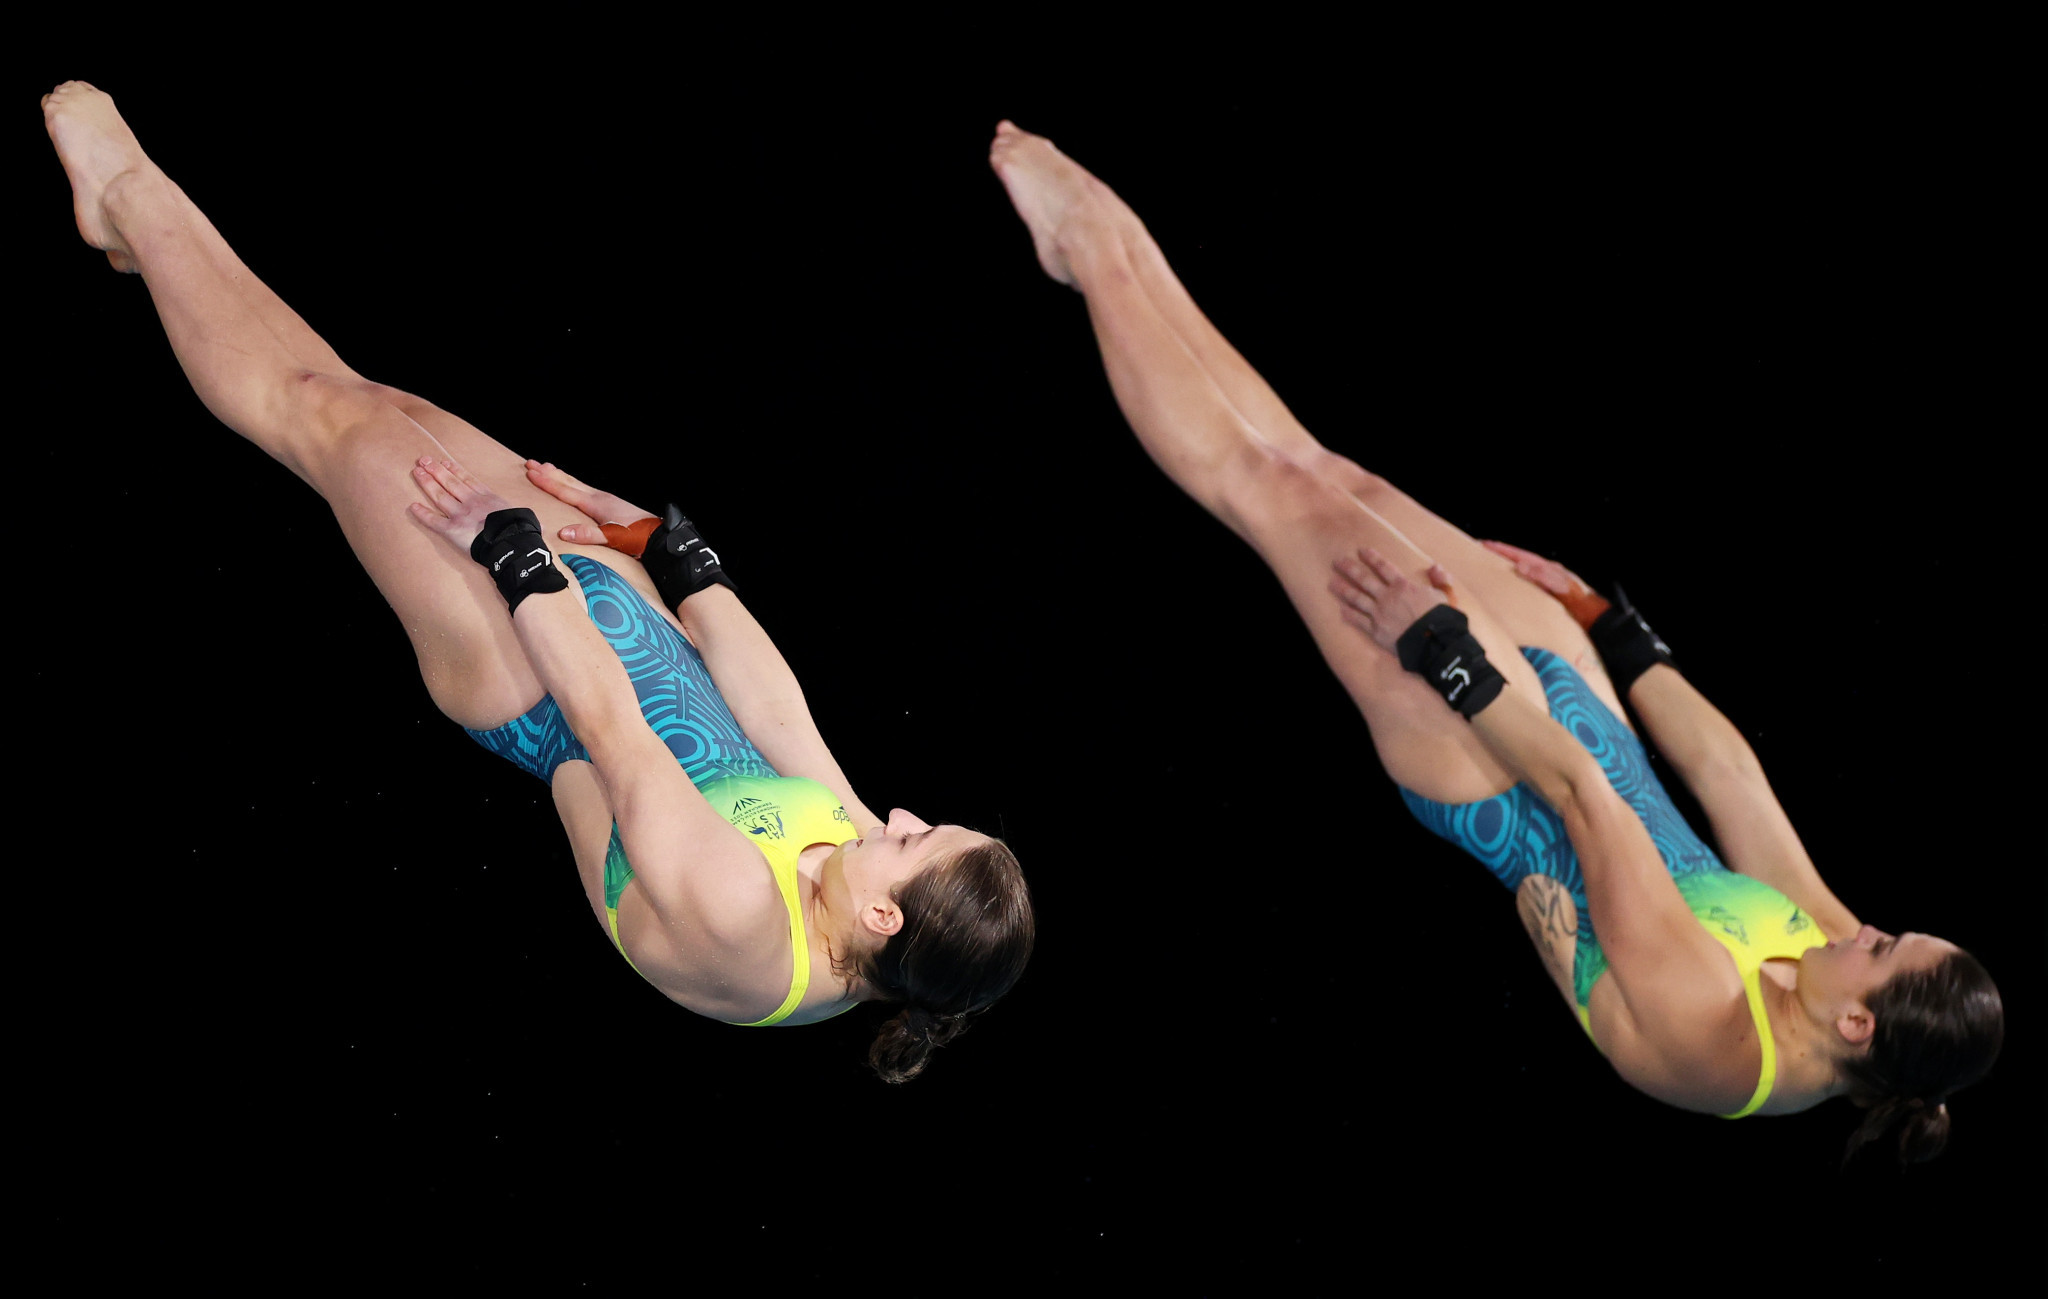 Charlie Petrov and Melissa Wu proved too strong in the women's synchronised 10m platform final ©Getty Images